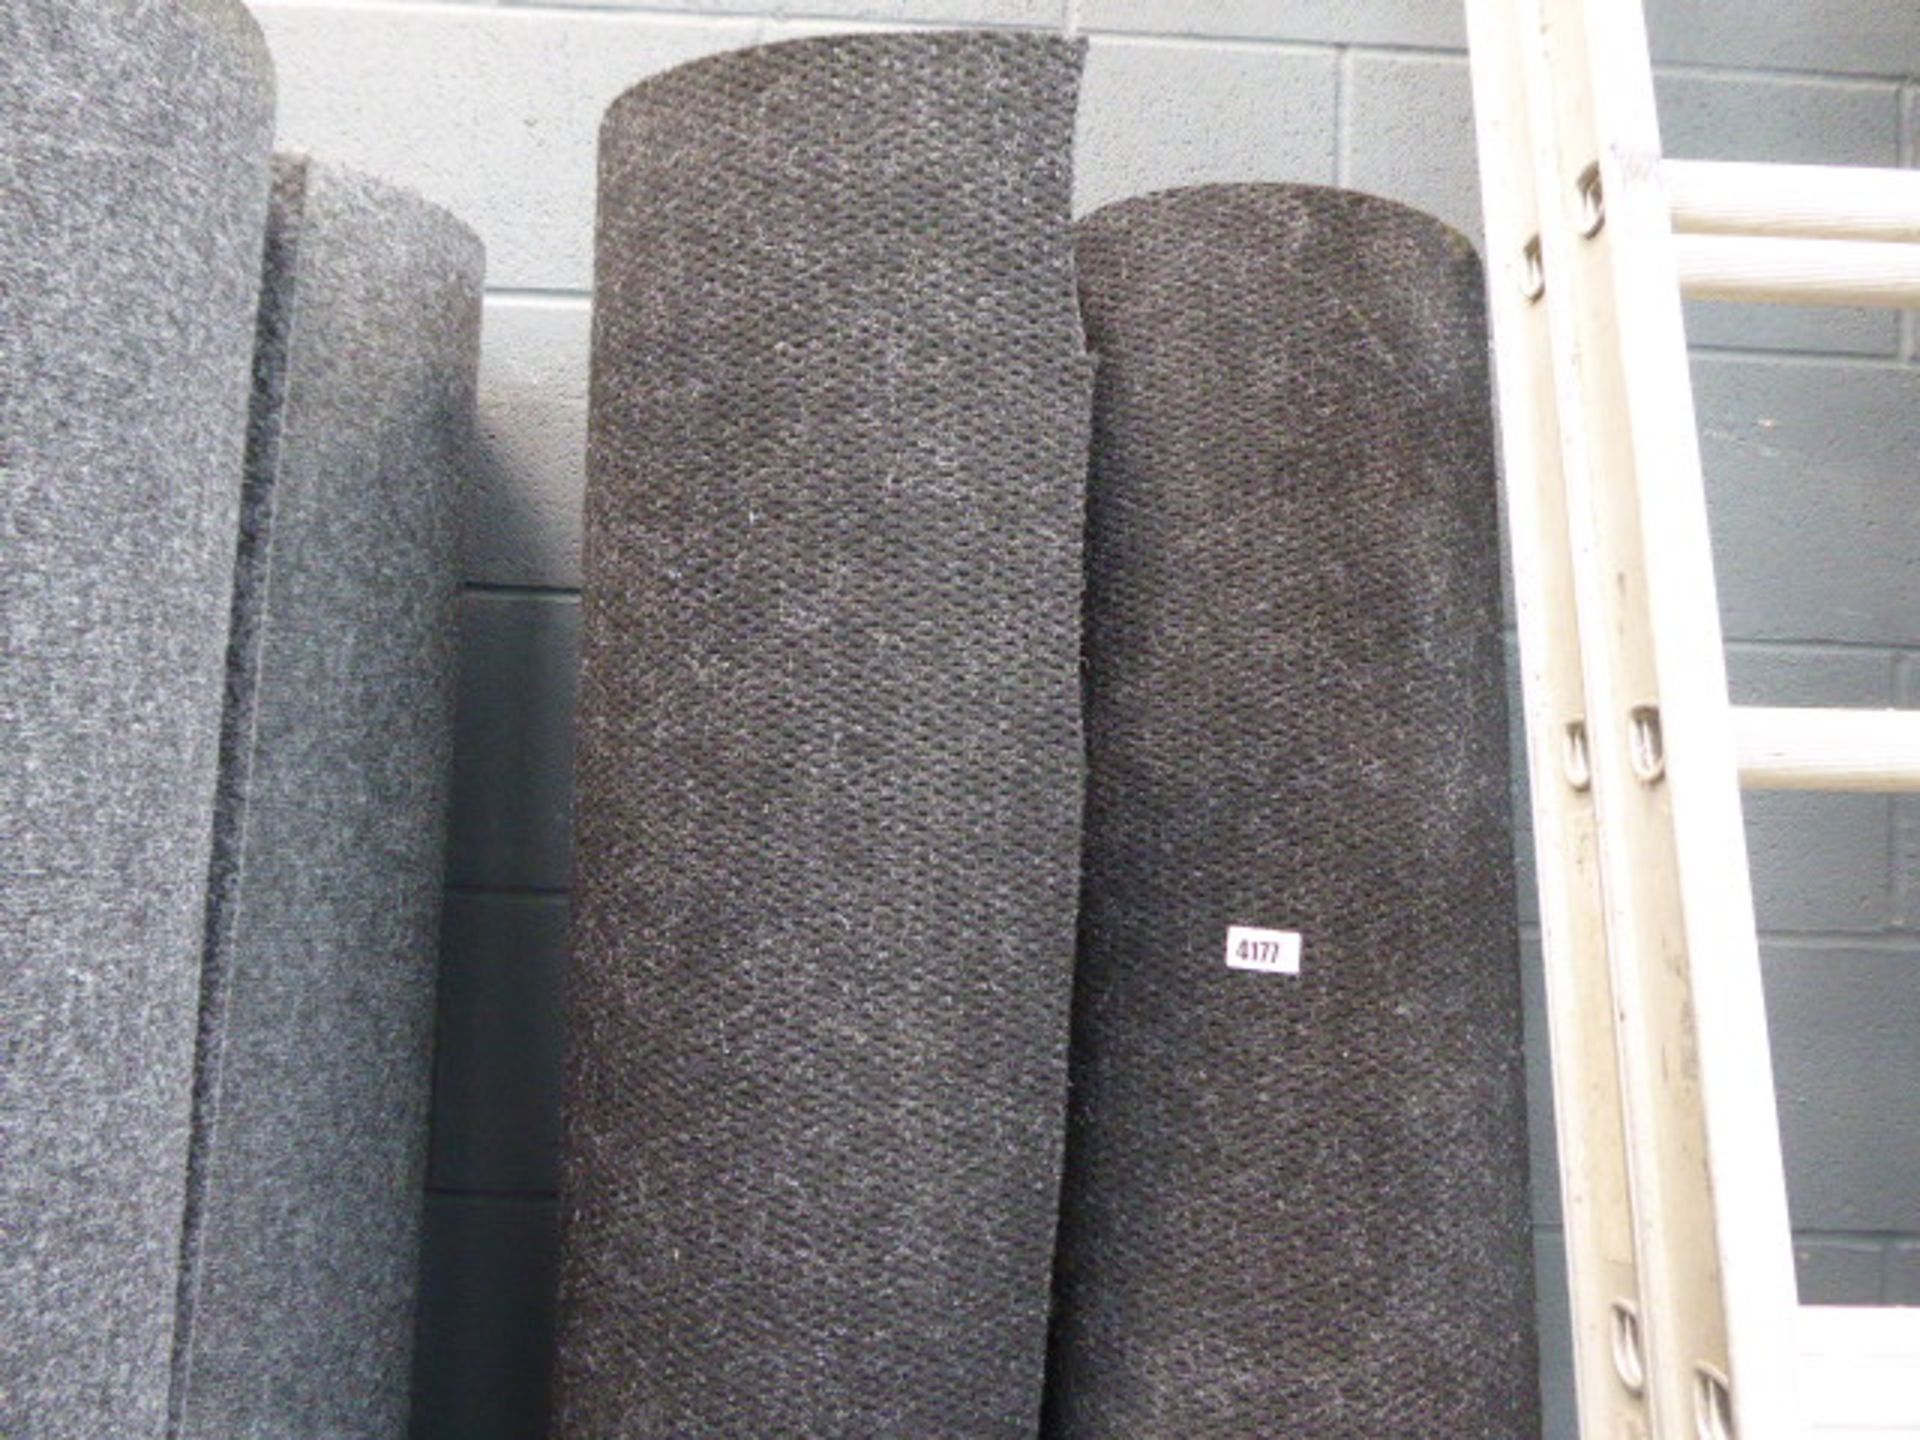 2 Black industrial style carpets approx. 8 m each